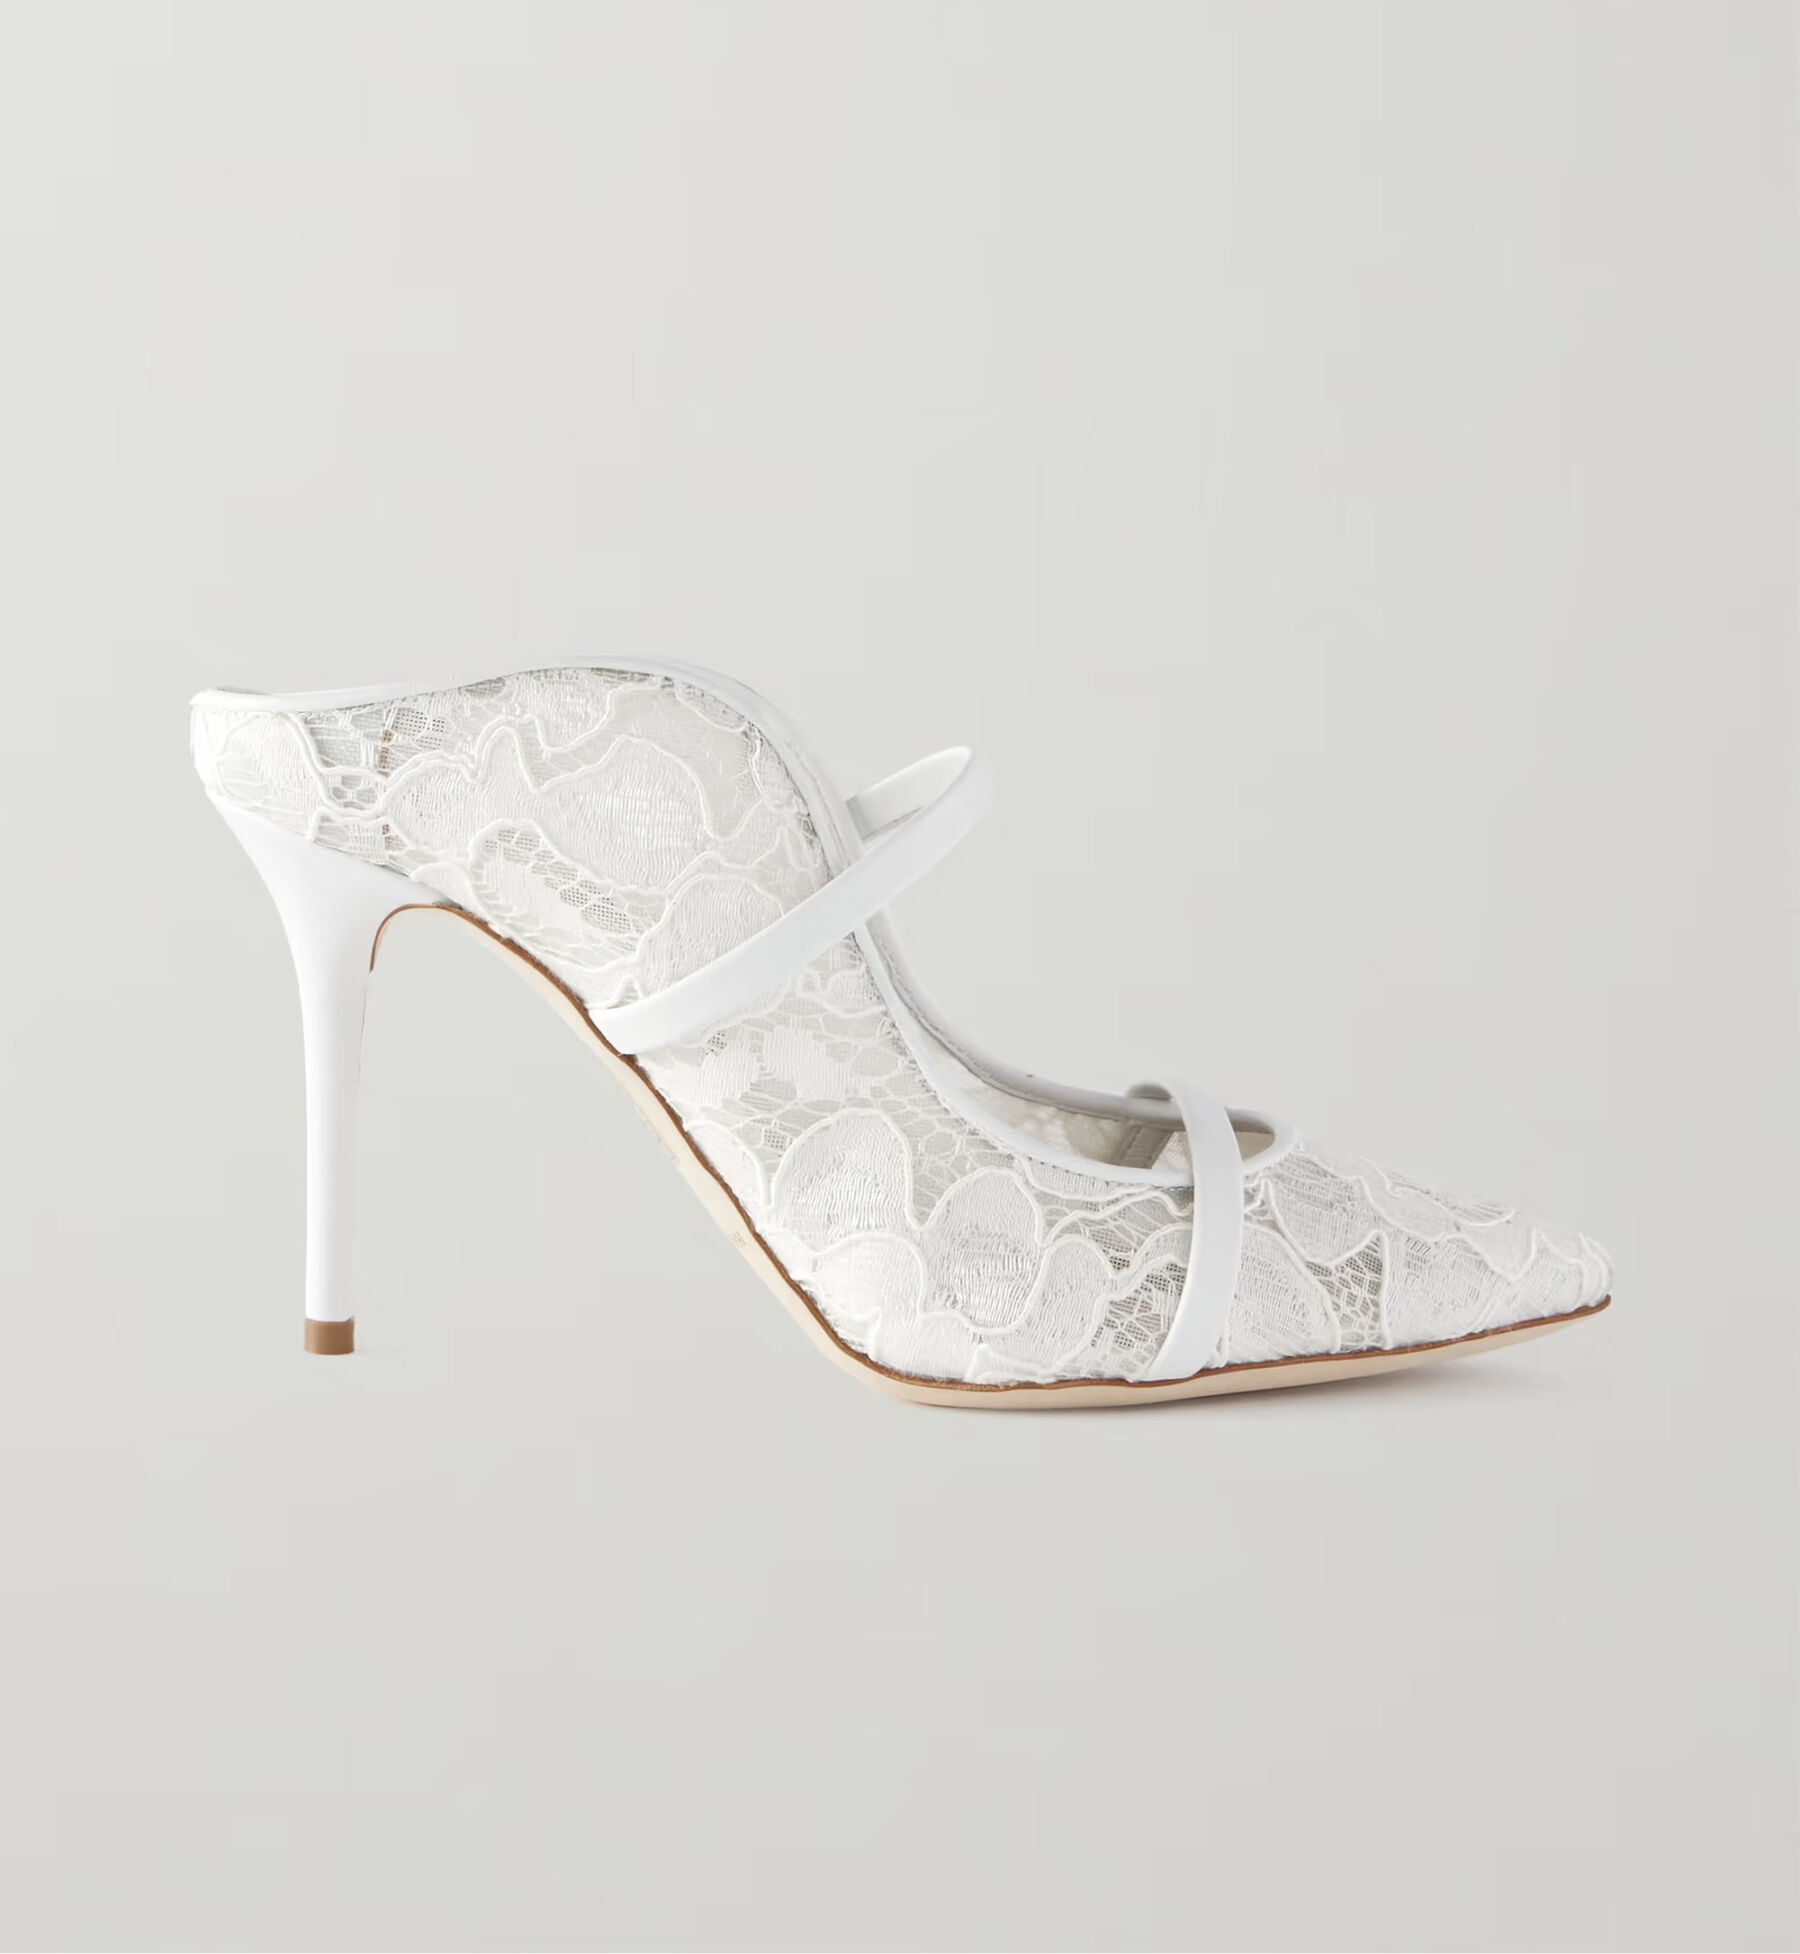 Malone Soulier high heel wedding shoes